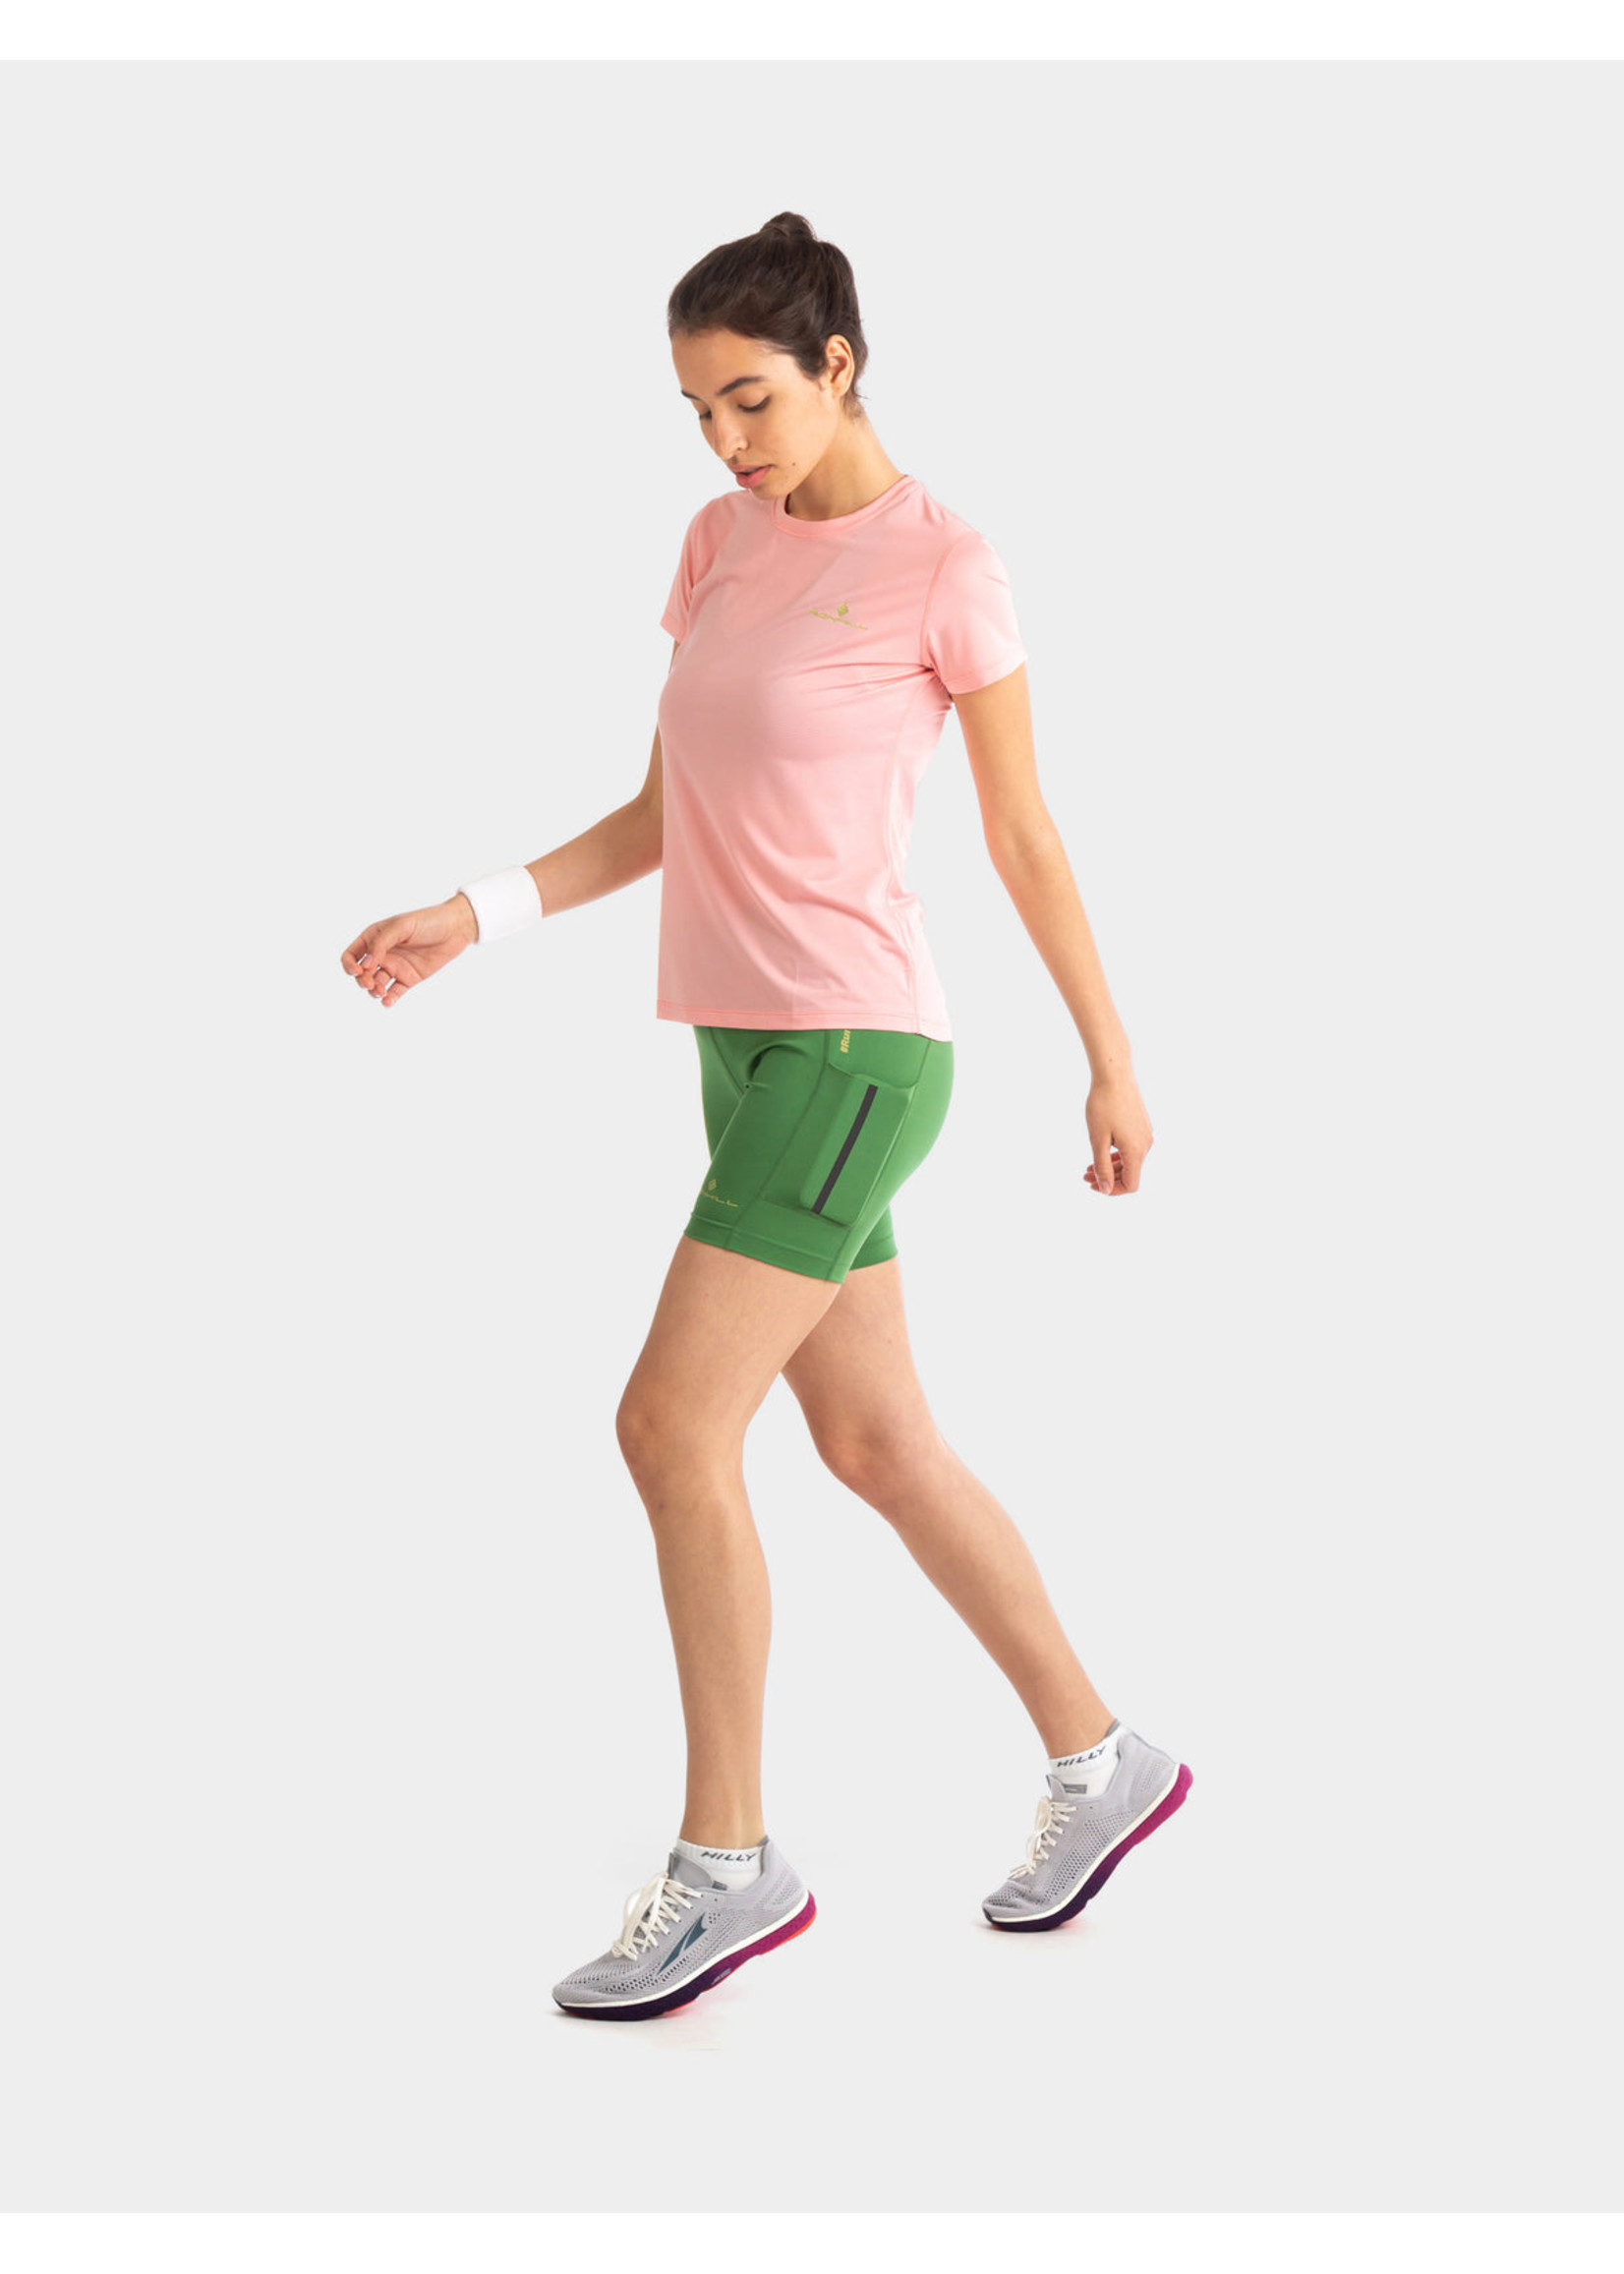 Ronhill Ronhill Tech Ladies S/S Tee (2022)